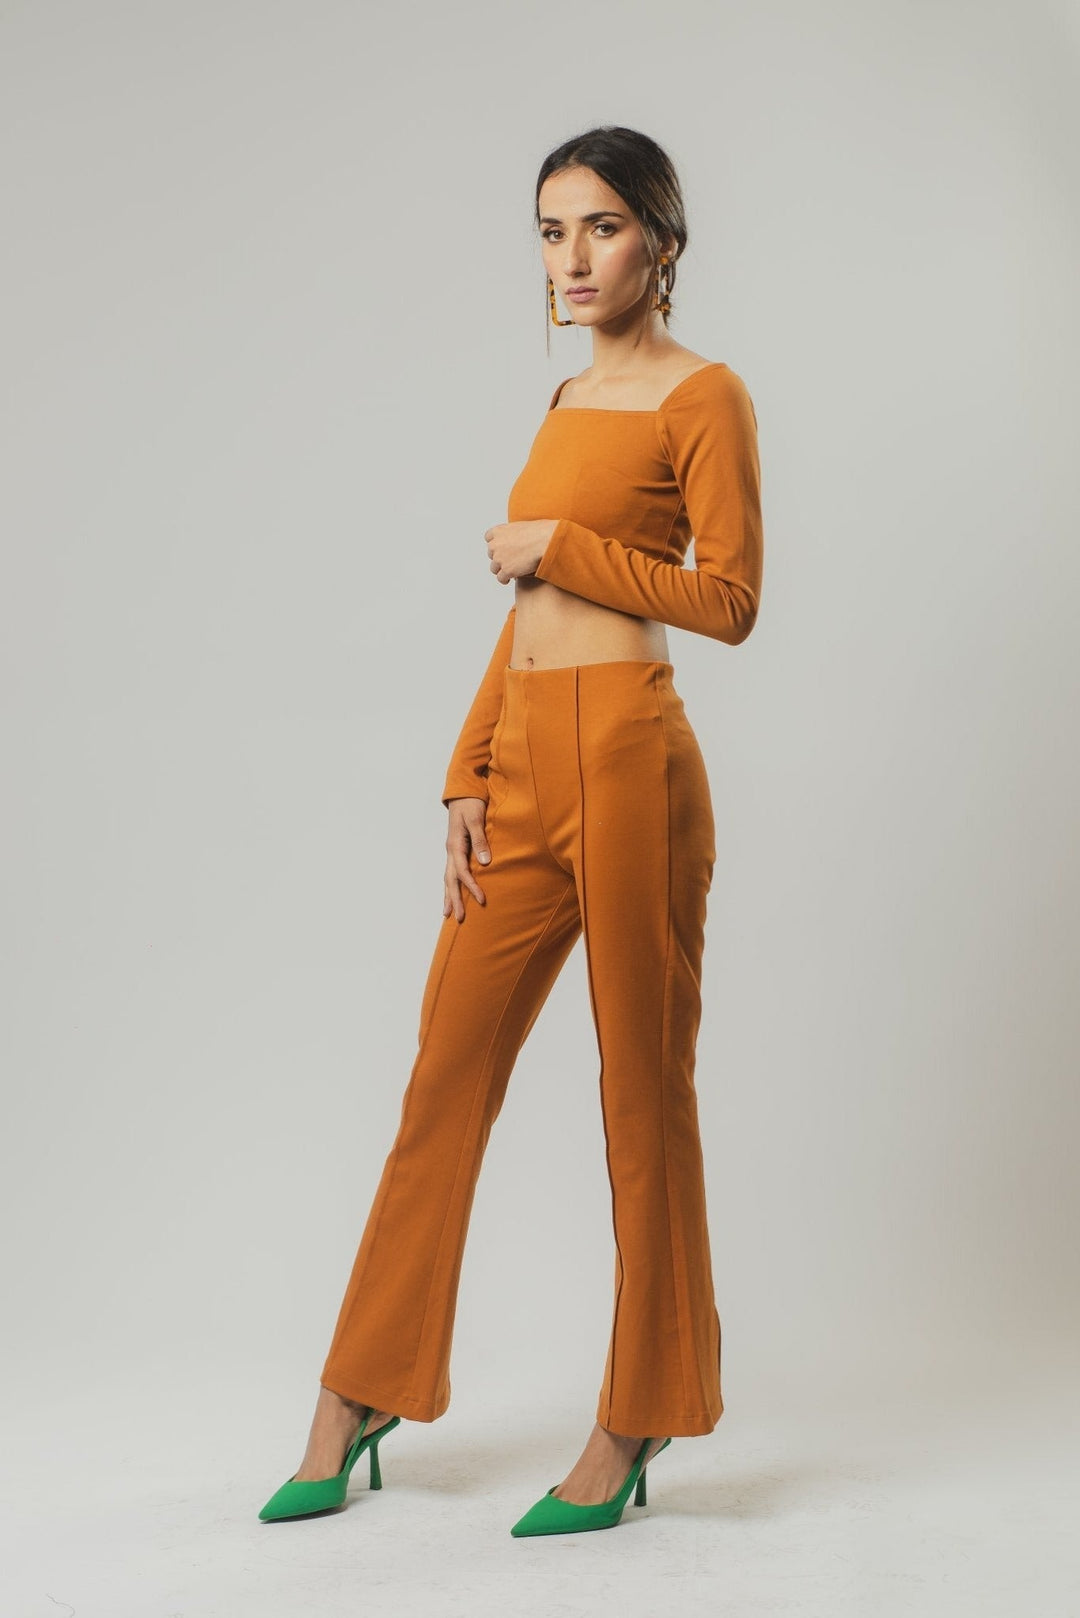 Women's ribbed crop top and high-waisted pants